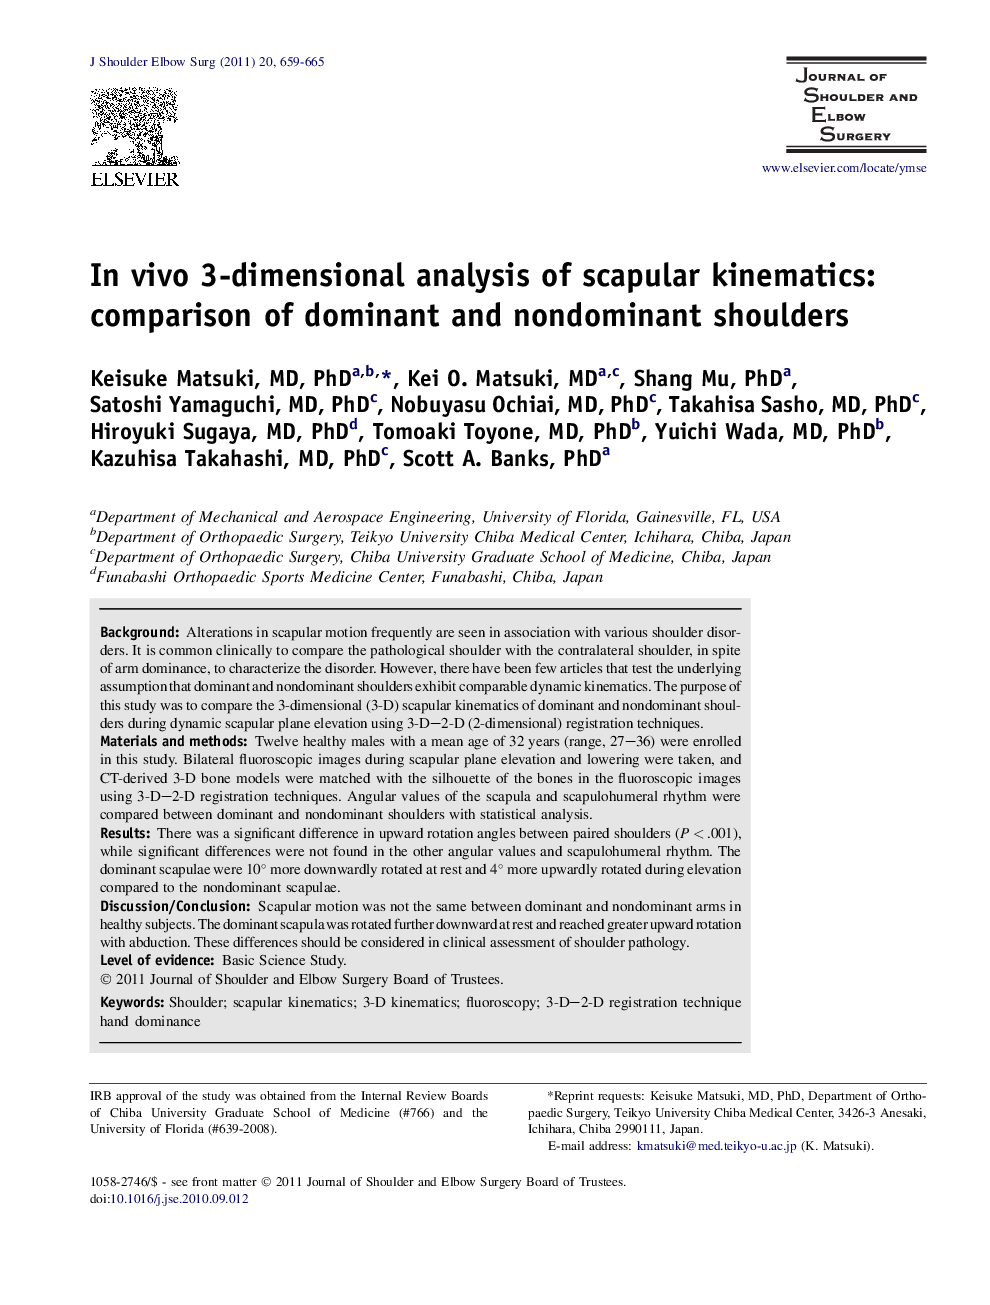 In vivo 3-dimensional analysis of scapular kinematics: comparison of dominant and nondominant shoulders 